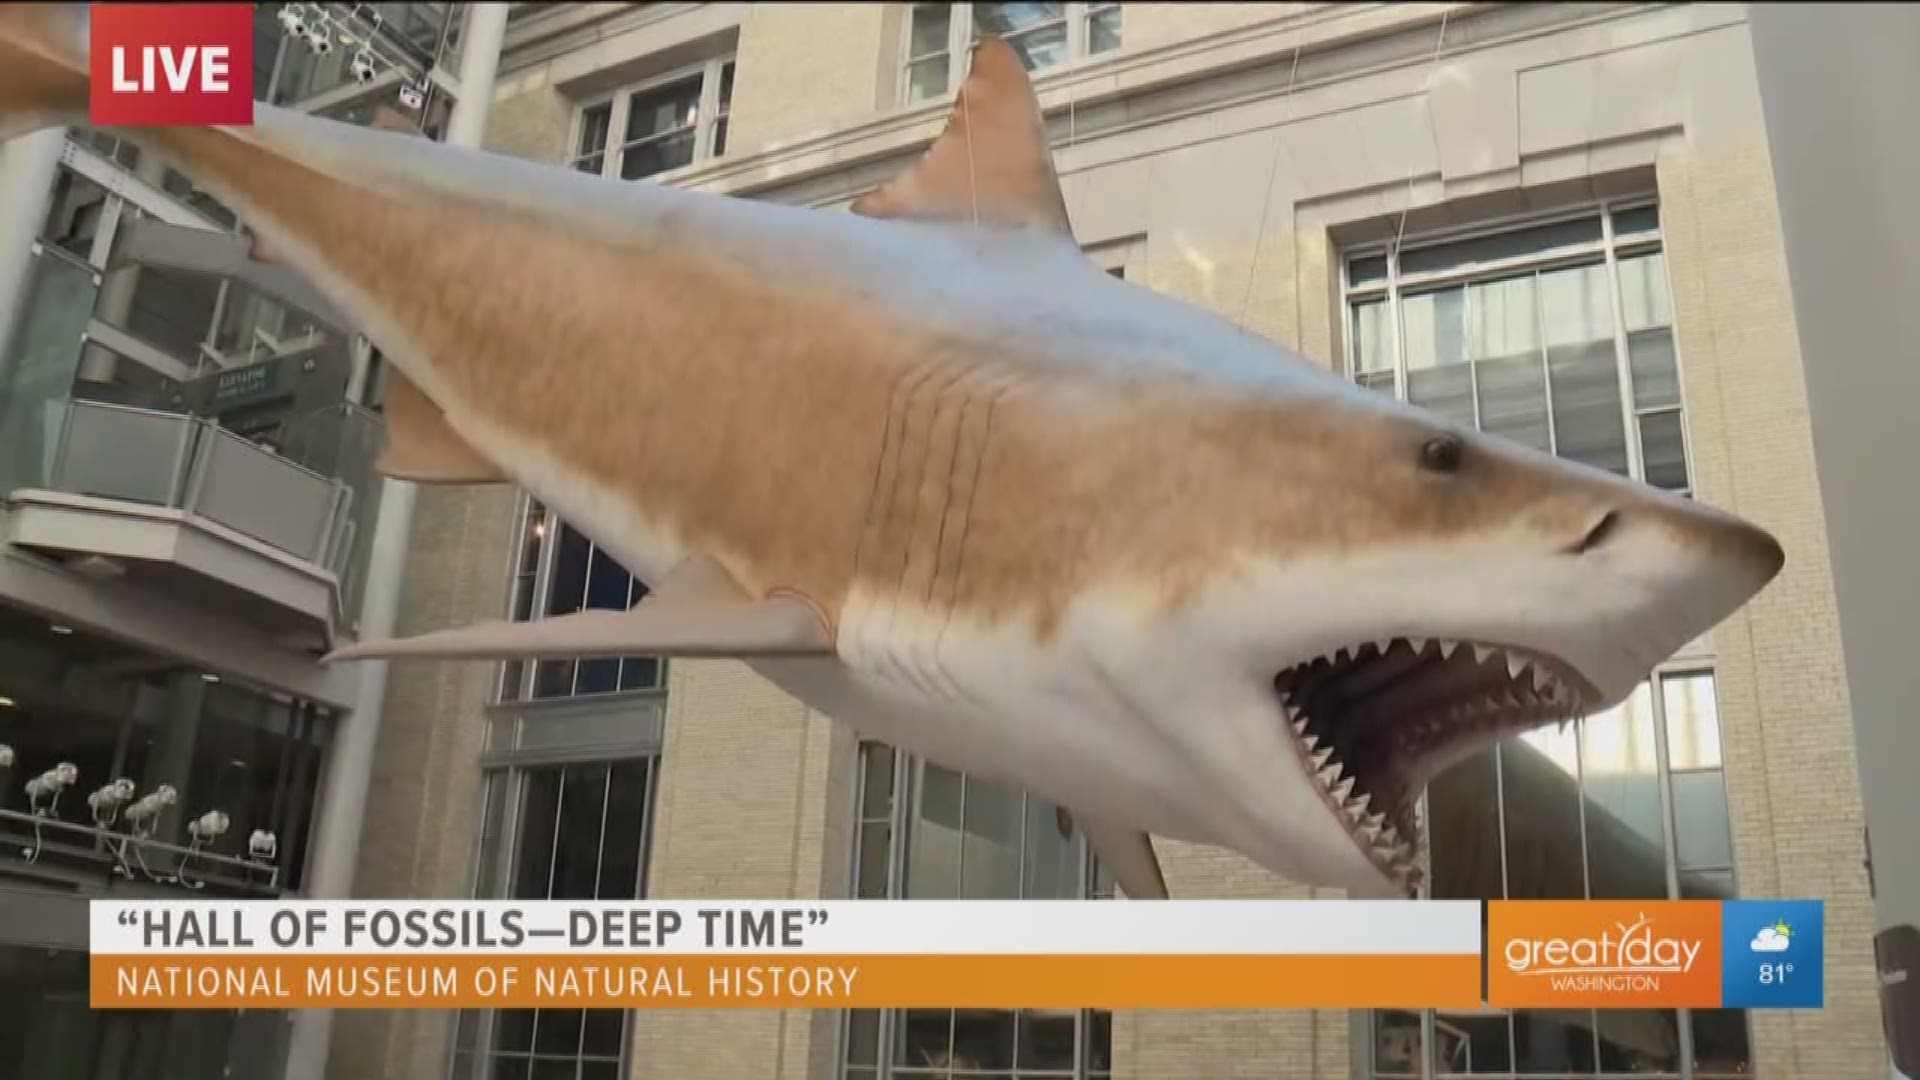 Dr. Hans Seus, curator at the National Museum of Natural History talks their new exhibit which features exotic and unusual creatures, including a 50-foot shark. Visit the new exhibit any day of the week from 10 a.m. to closing.